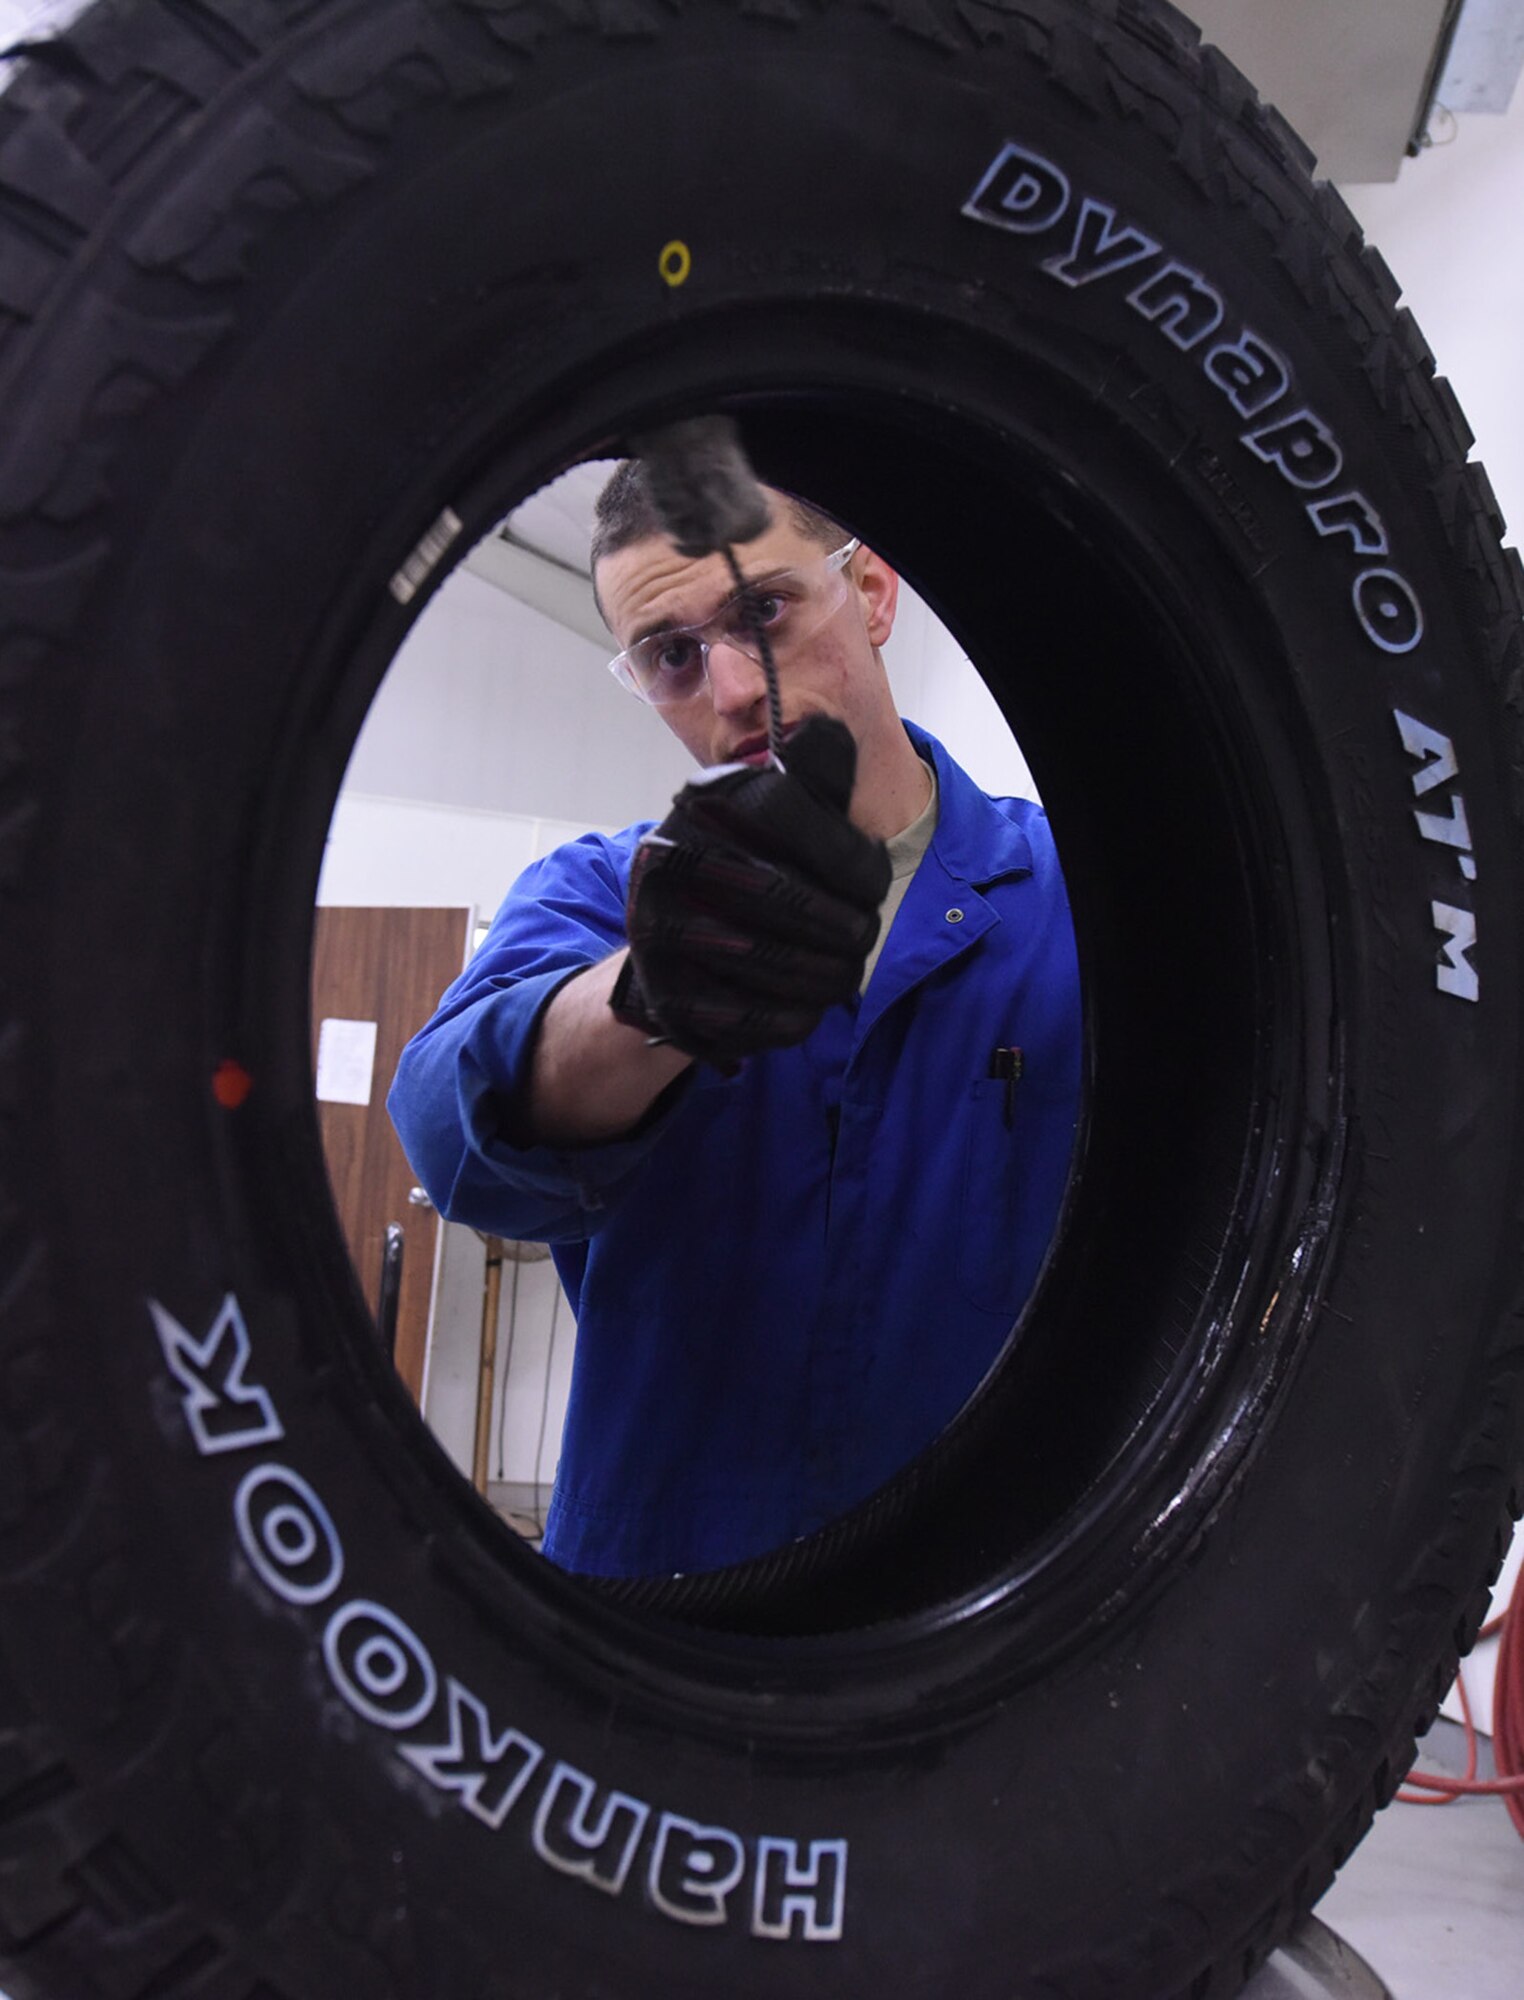 Airman 1st Class Johnathan Allen, 341st Logistics Readiness Squadron vehicle maintenance apprentice, uses tire lube on a light truck tire to easily install the rim at the LRS tire shop Dec. 1, 2016, at Malmstrom Air Force Base, Mont. The tire lube helps with setting the sealant of the tire to prevent it from moving. (U.S. Air Force photo/Senior Airman Jaeda Tookes)